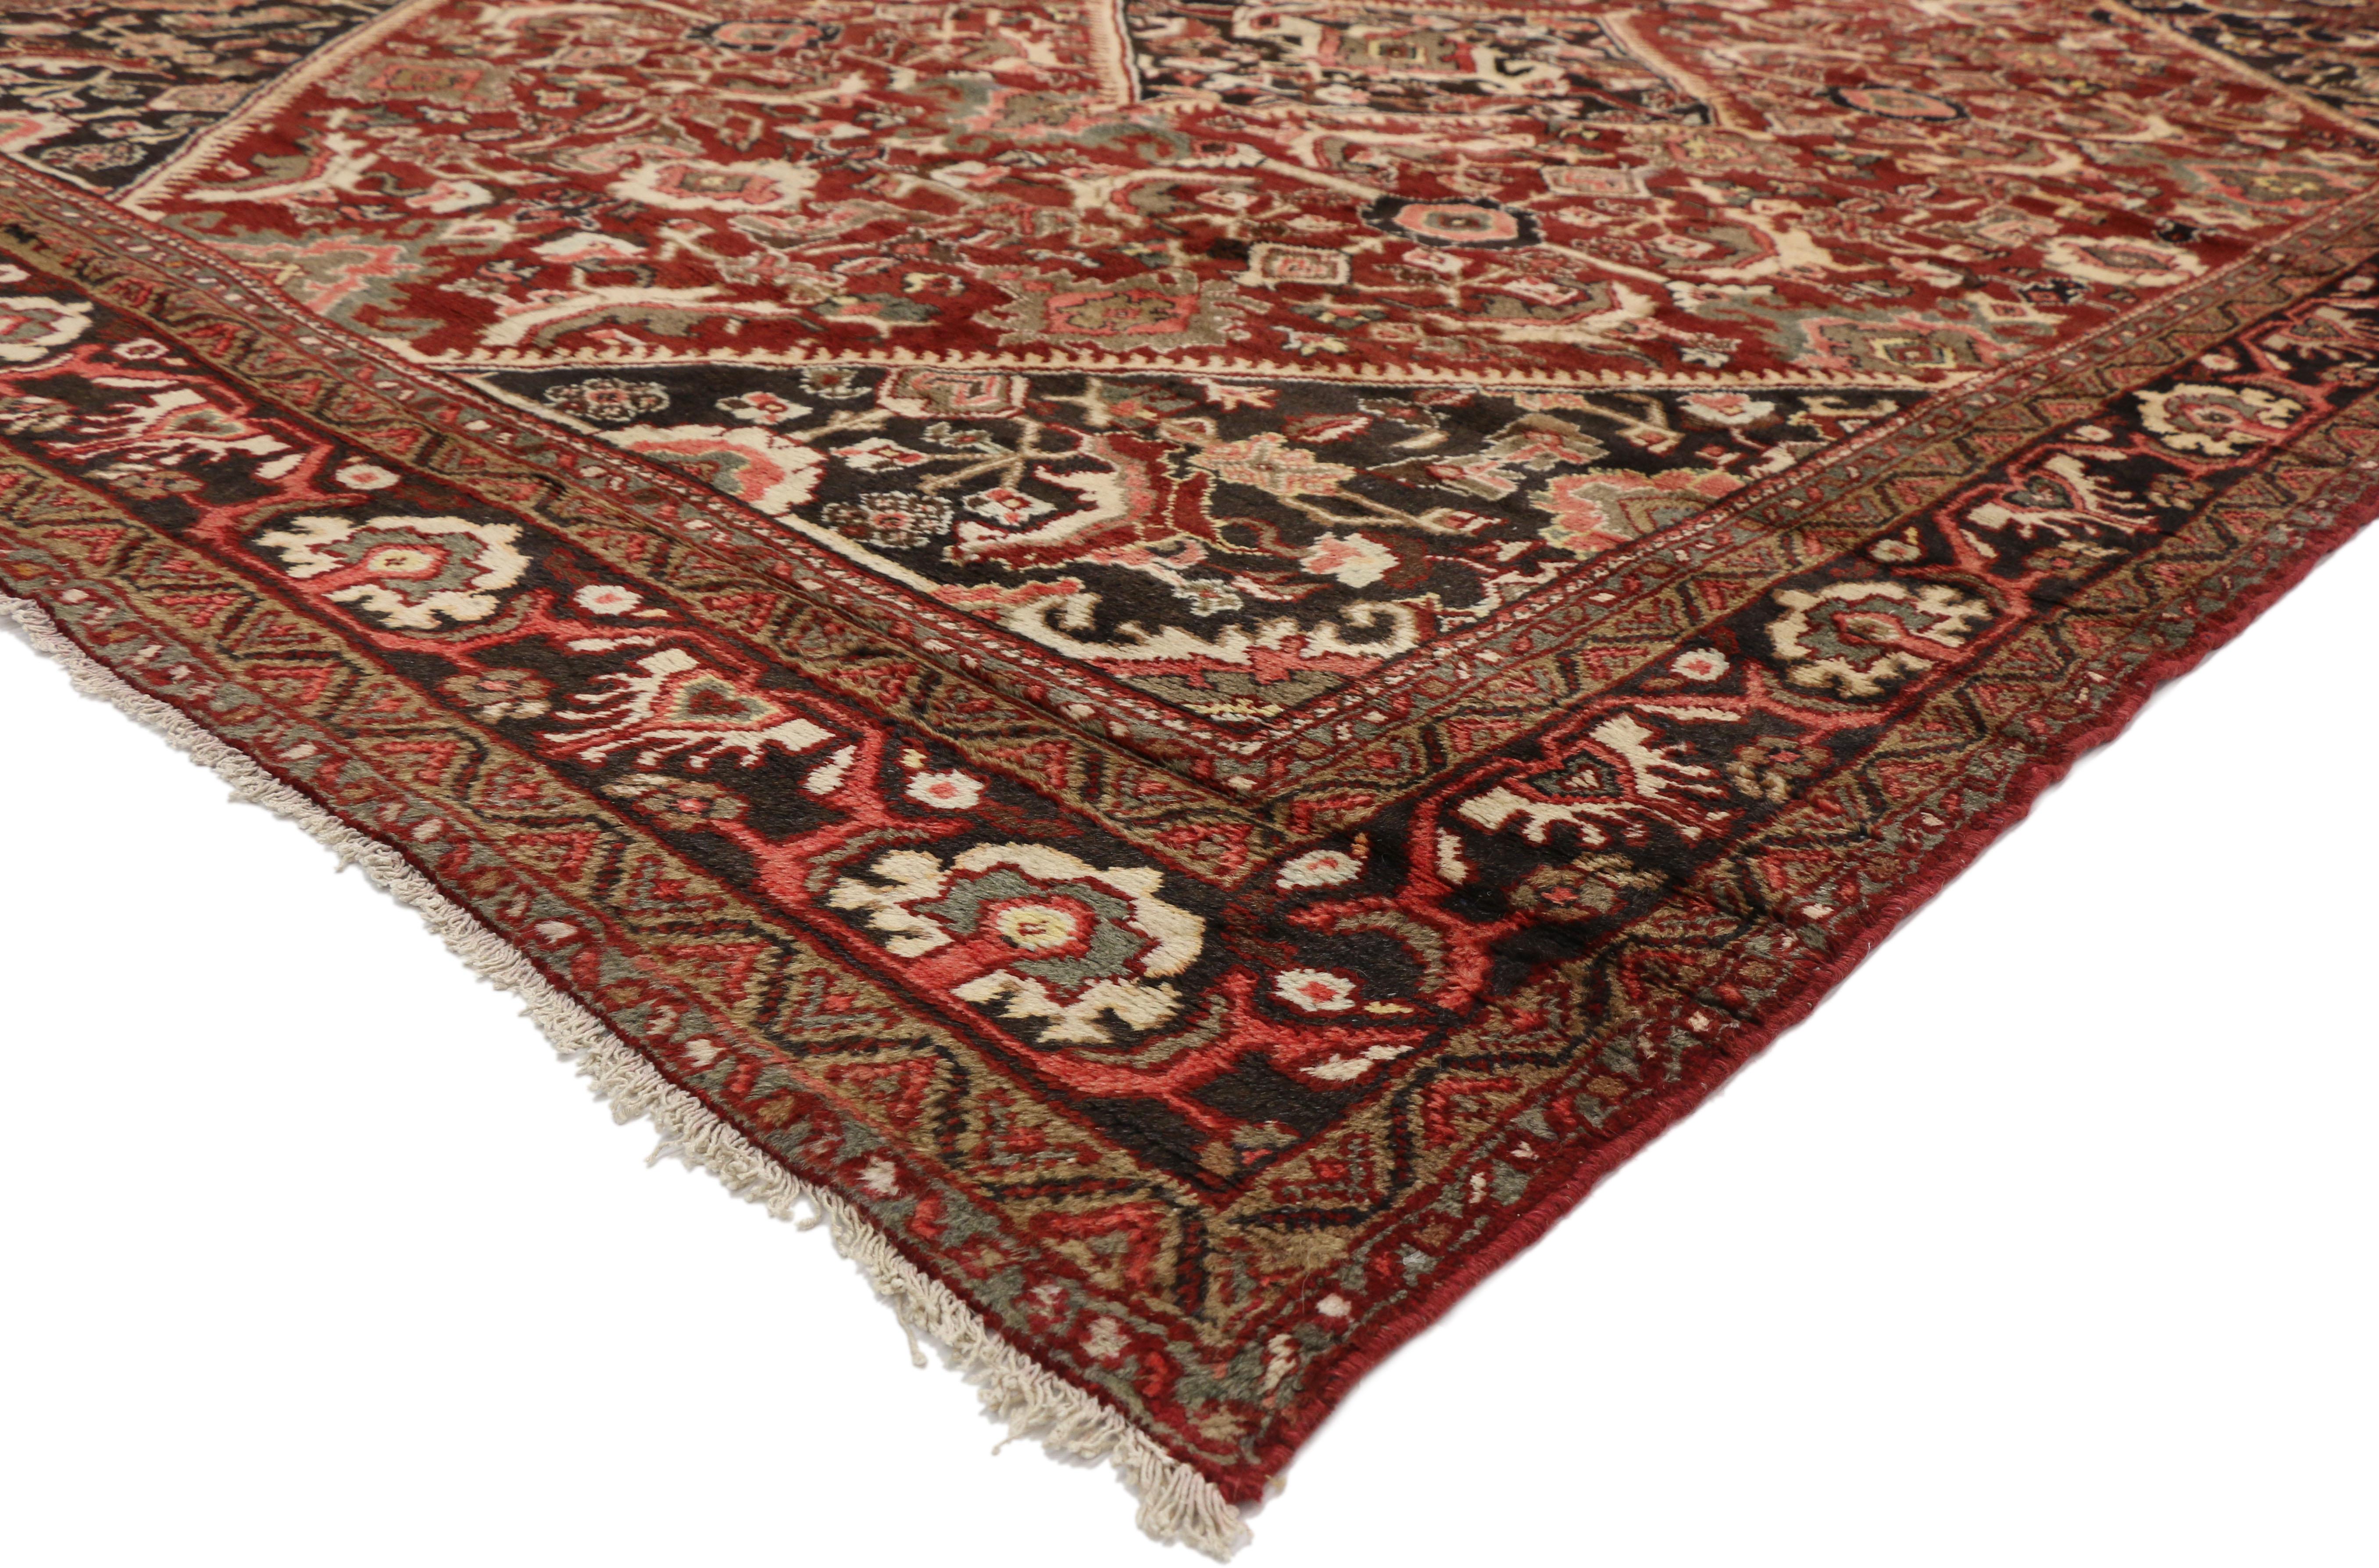 76317 Vintage Persian Mahal Rug with English Traditional Style 09'08 x 13'05. ​​With its timeless design and architectural elements of naturalistic forms, this hand knotted wool vintage Persian Mahal rug beautifully embodies a warm Arts and Crafts